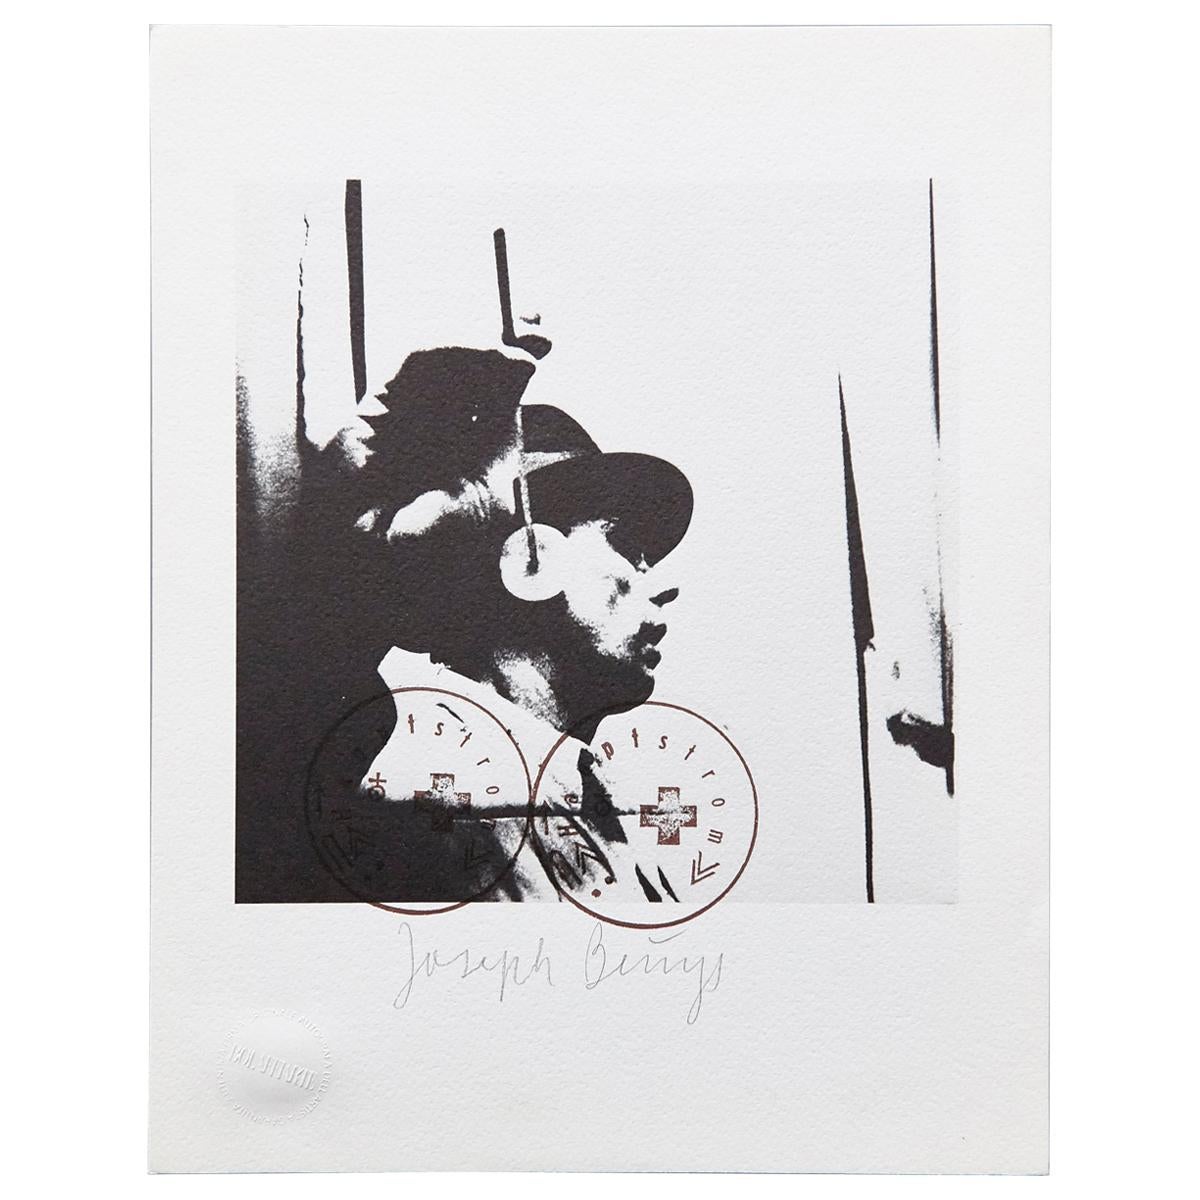 Joseph Beuys, Lithography "L'Udito", 1974